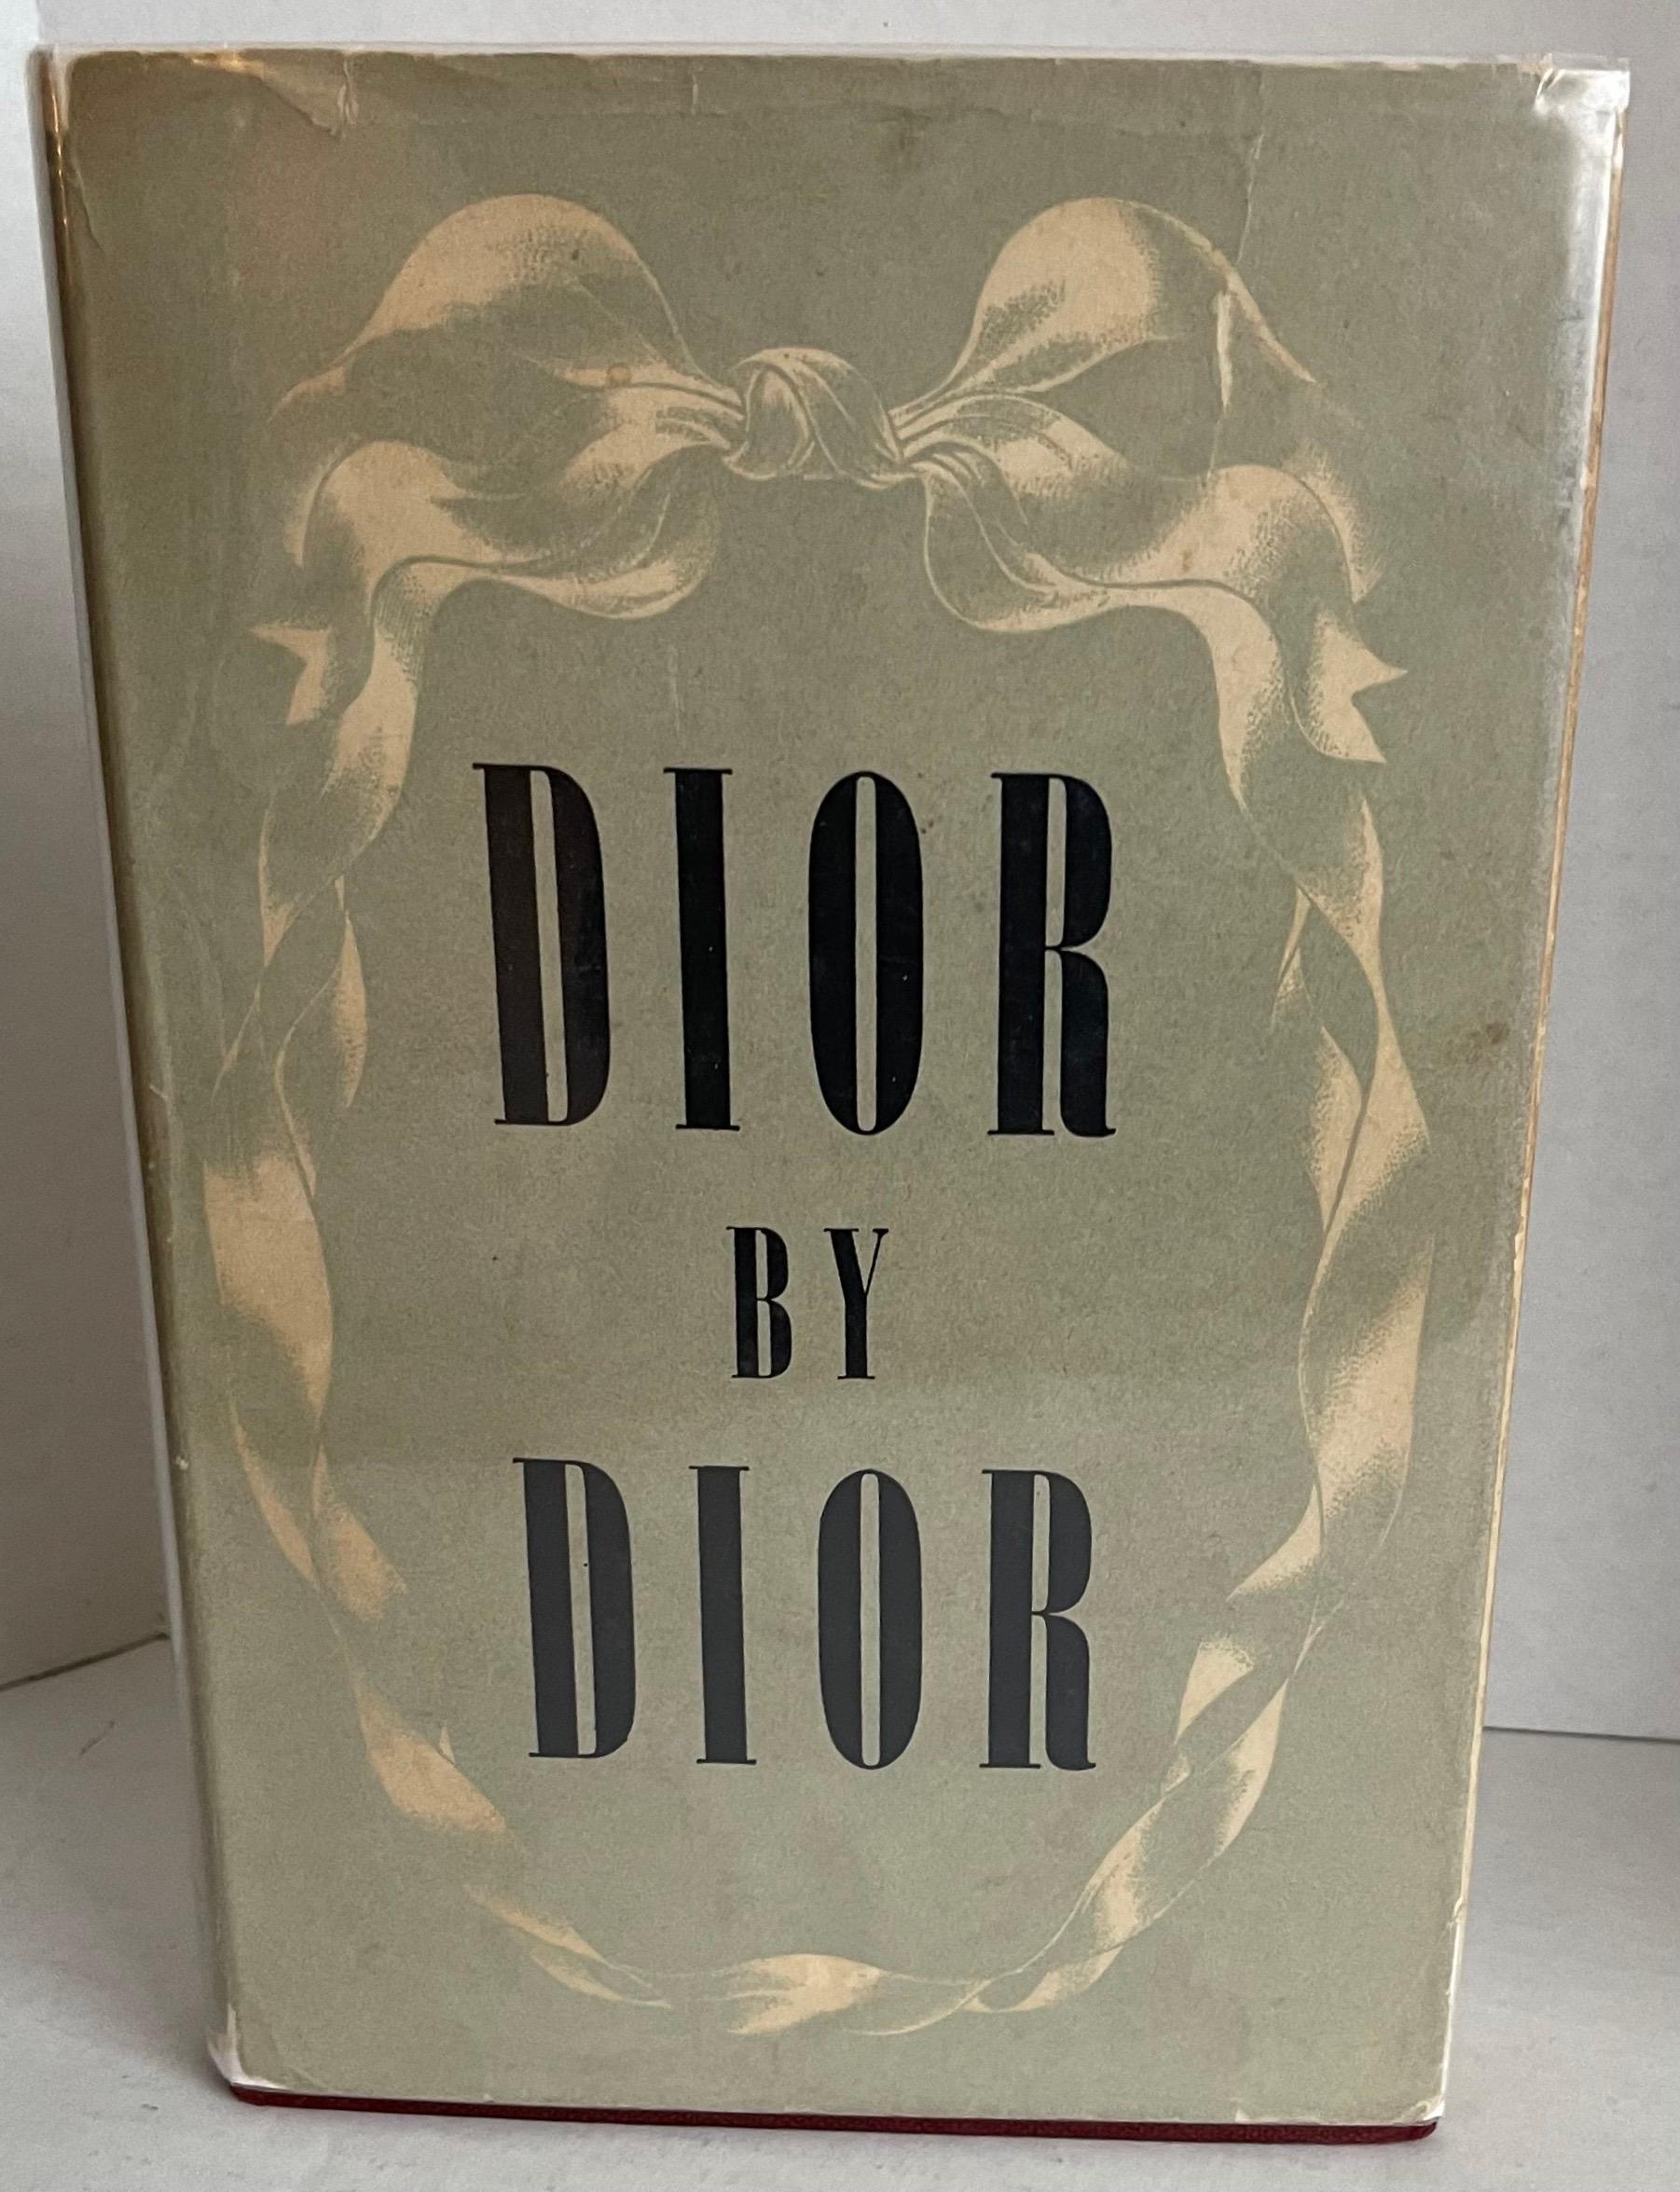 Dior by Dior the Autobiography of Christian Dior 1957 English Ed.  Featuring four distinct sections  - The Birth of Maison Christian Dior; From the Idea to the Dress; Inside a Couture House; The Adventure of My Life. 
Clear Mylar jacket has been